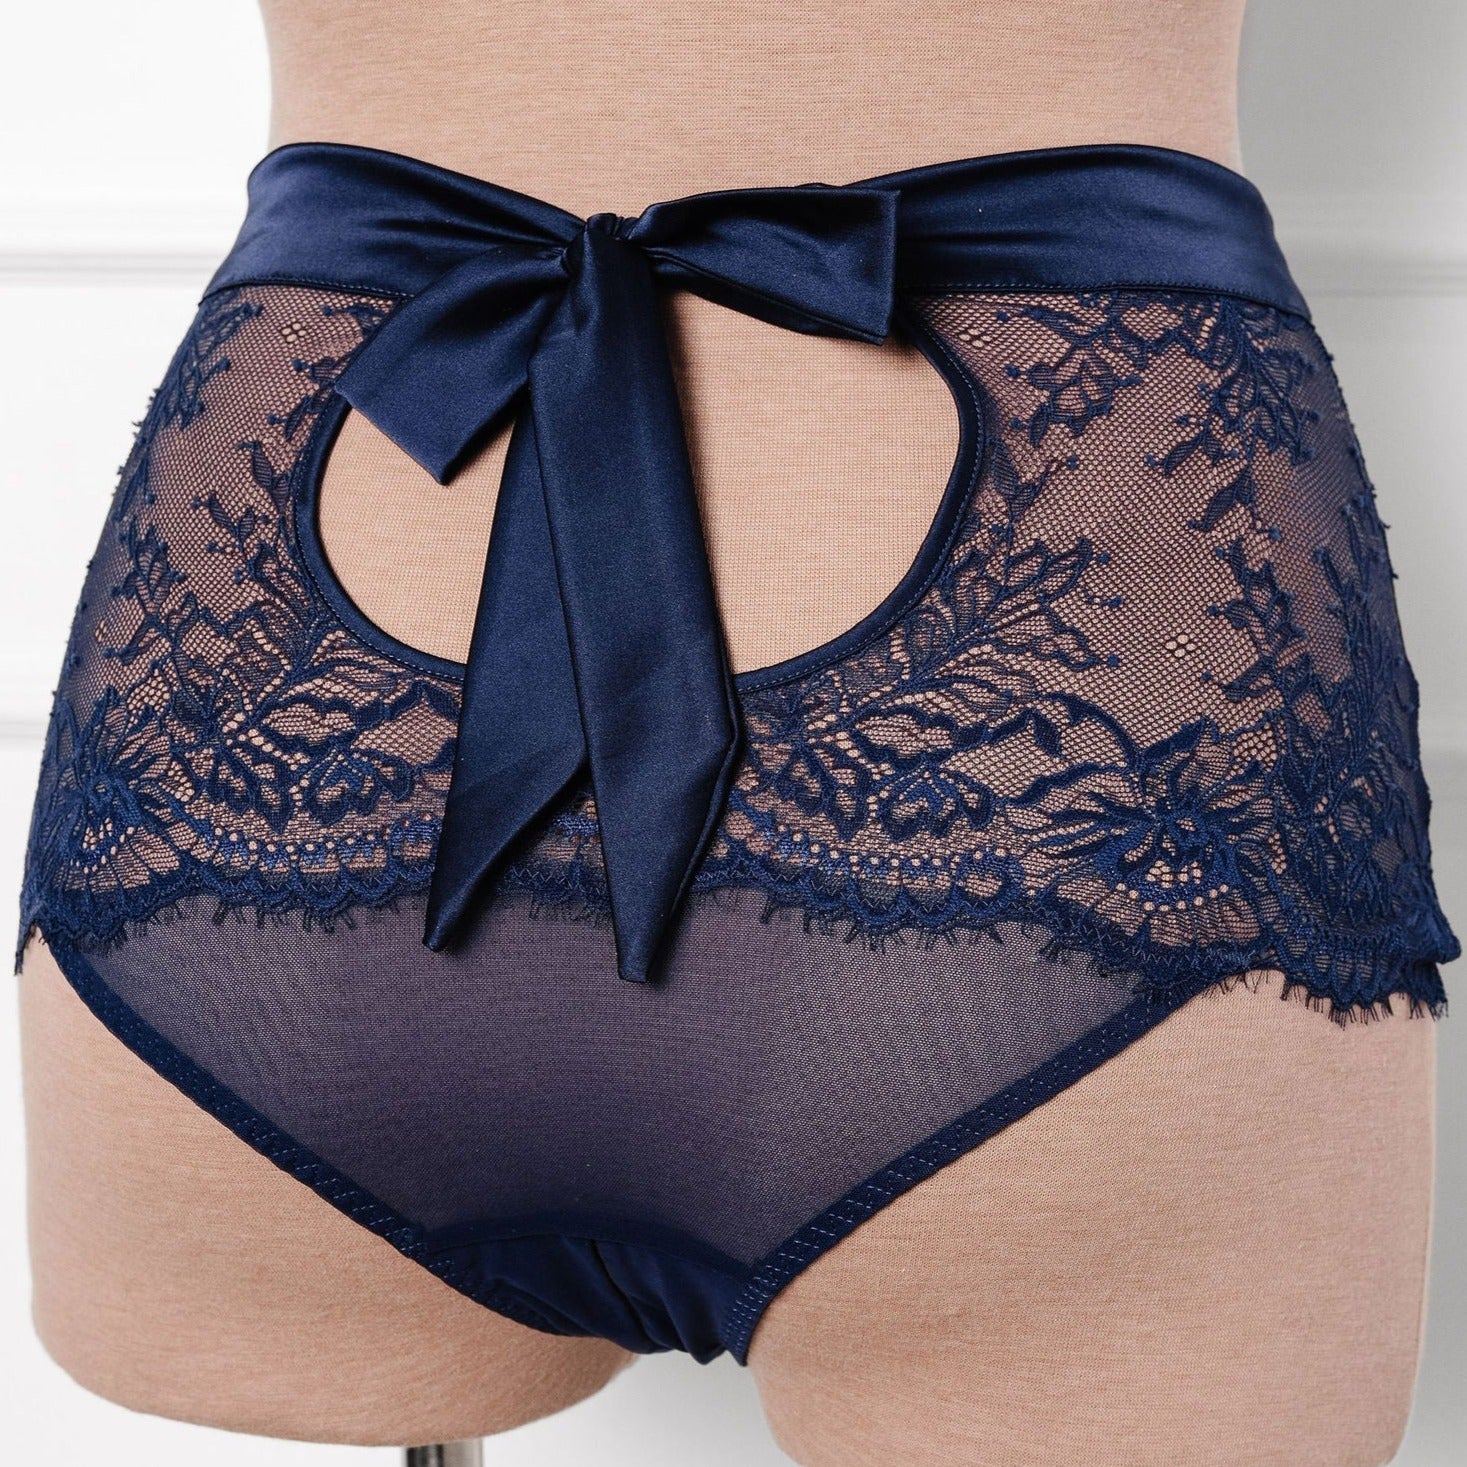 Eyelash Lace Bow High Waist Crotchless Panty - Navy by Mentionables